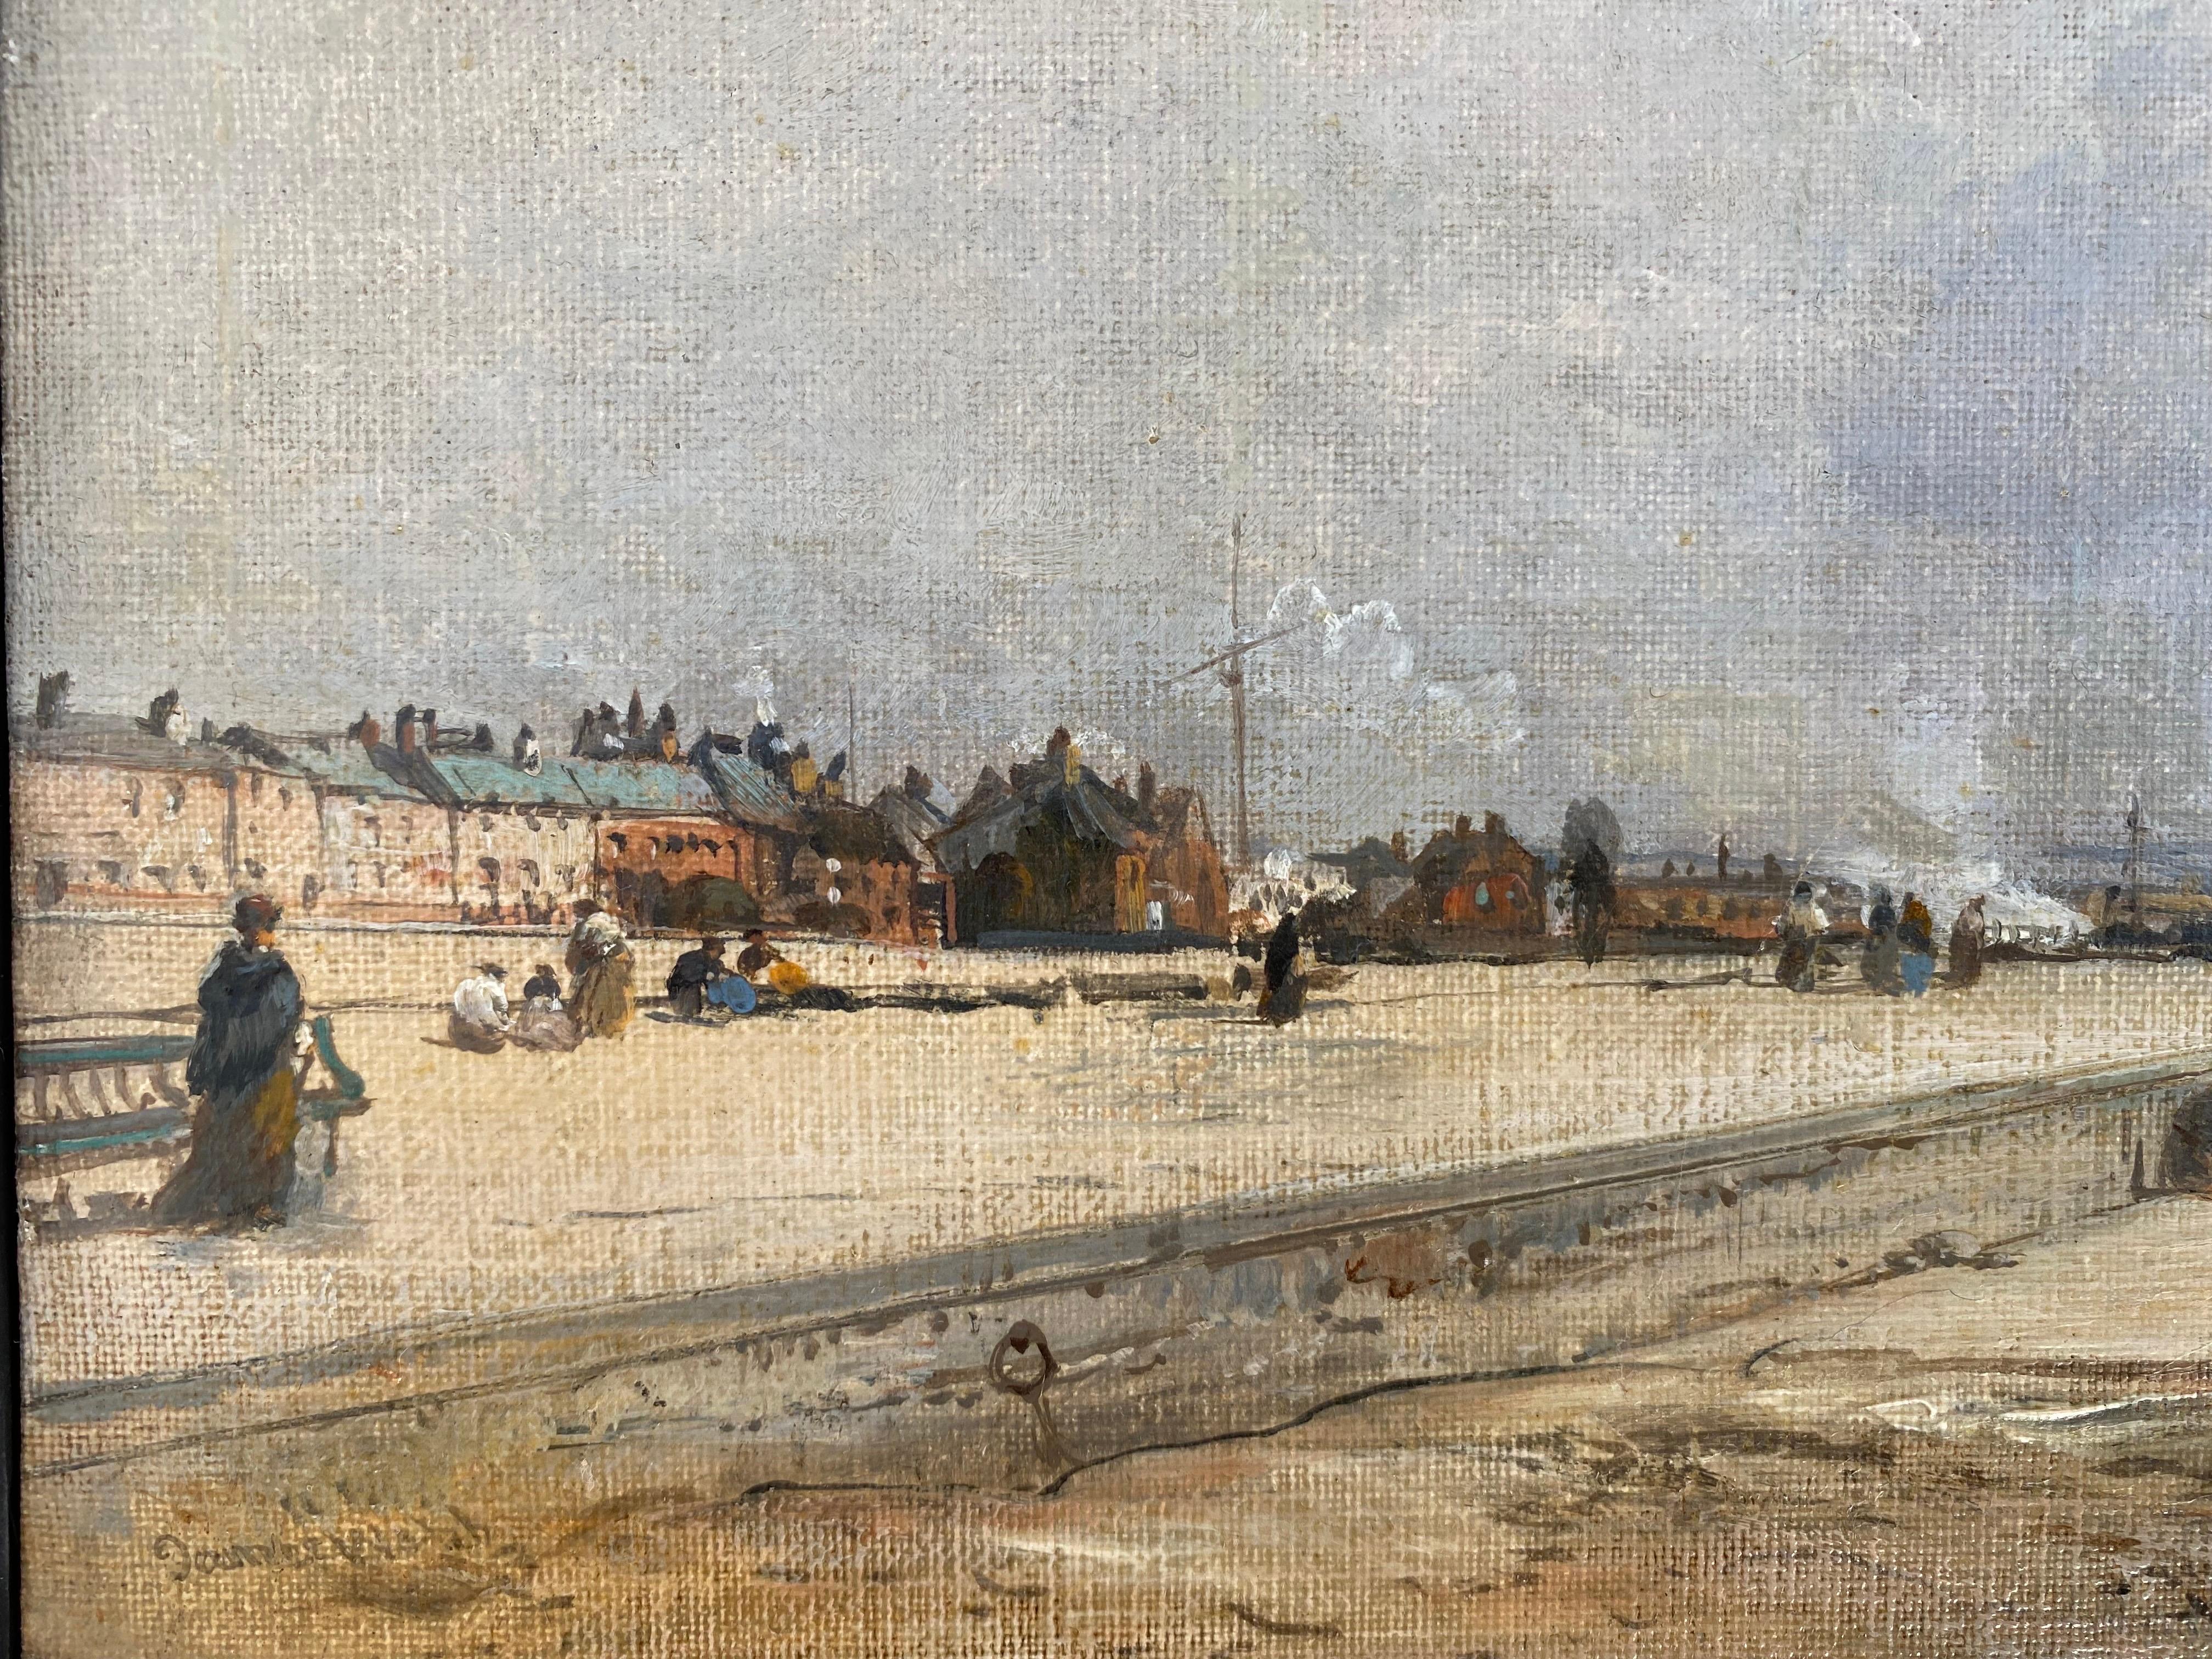 James Webb
1825 - 1895
Littlehampton, Sussex
Oil on board, signed lower left
Image size: 8 x 12 inches
Contemporary silver gilt frame

This painting has on the verso written by 
the artist that it was painted on the spot in September 1882.

James